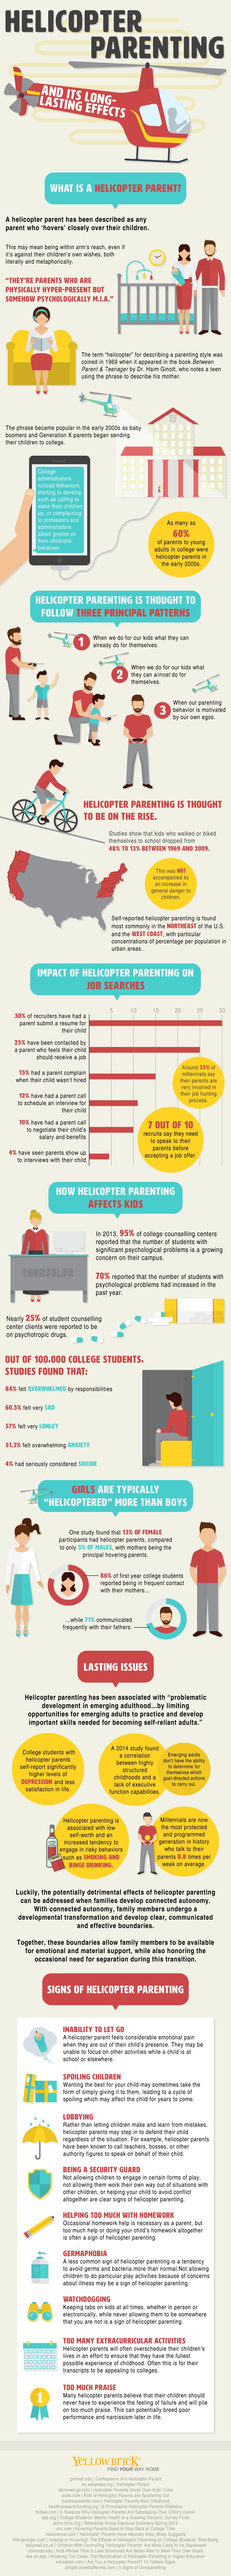 Helicopter-parent-8-242